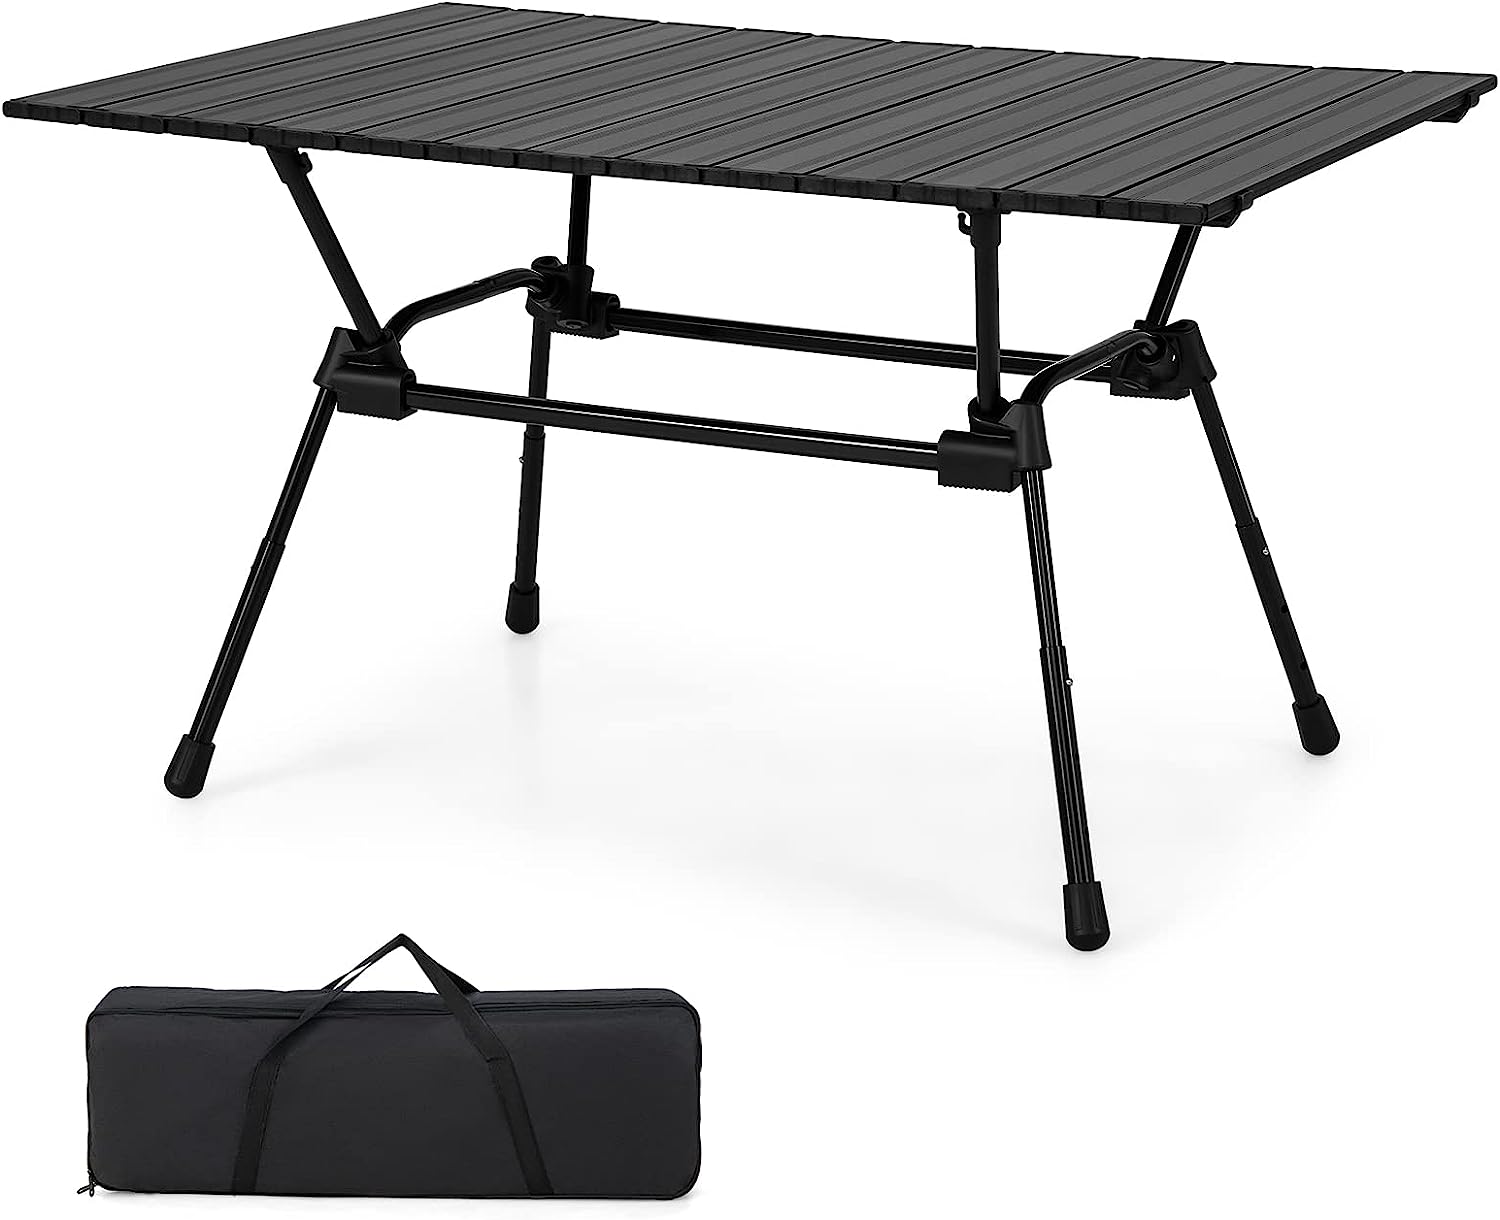 Giantex Folding Camping Table, Heavy-Duty Outdoor Folding Table w/Carry Bag